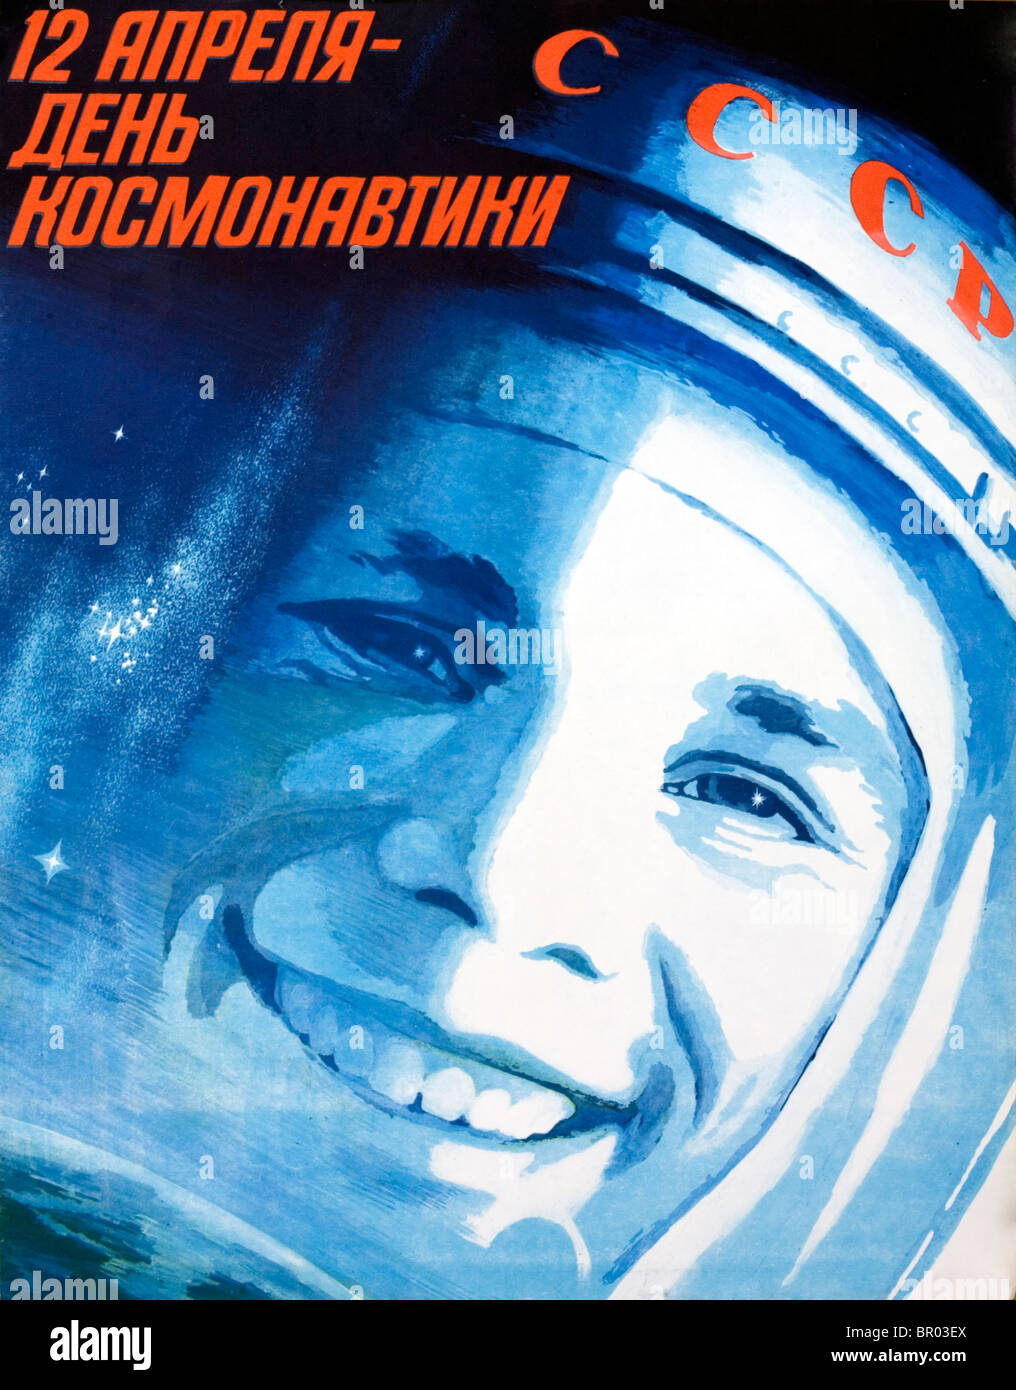 Soviet poster celebrating the first manned space flight,by Yuri Gagarin on 12th April 1961. Stock Photo